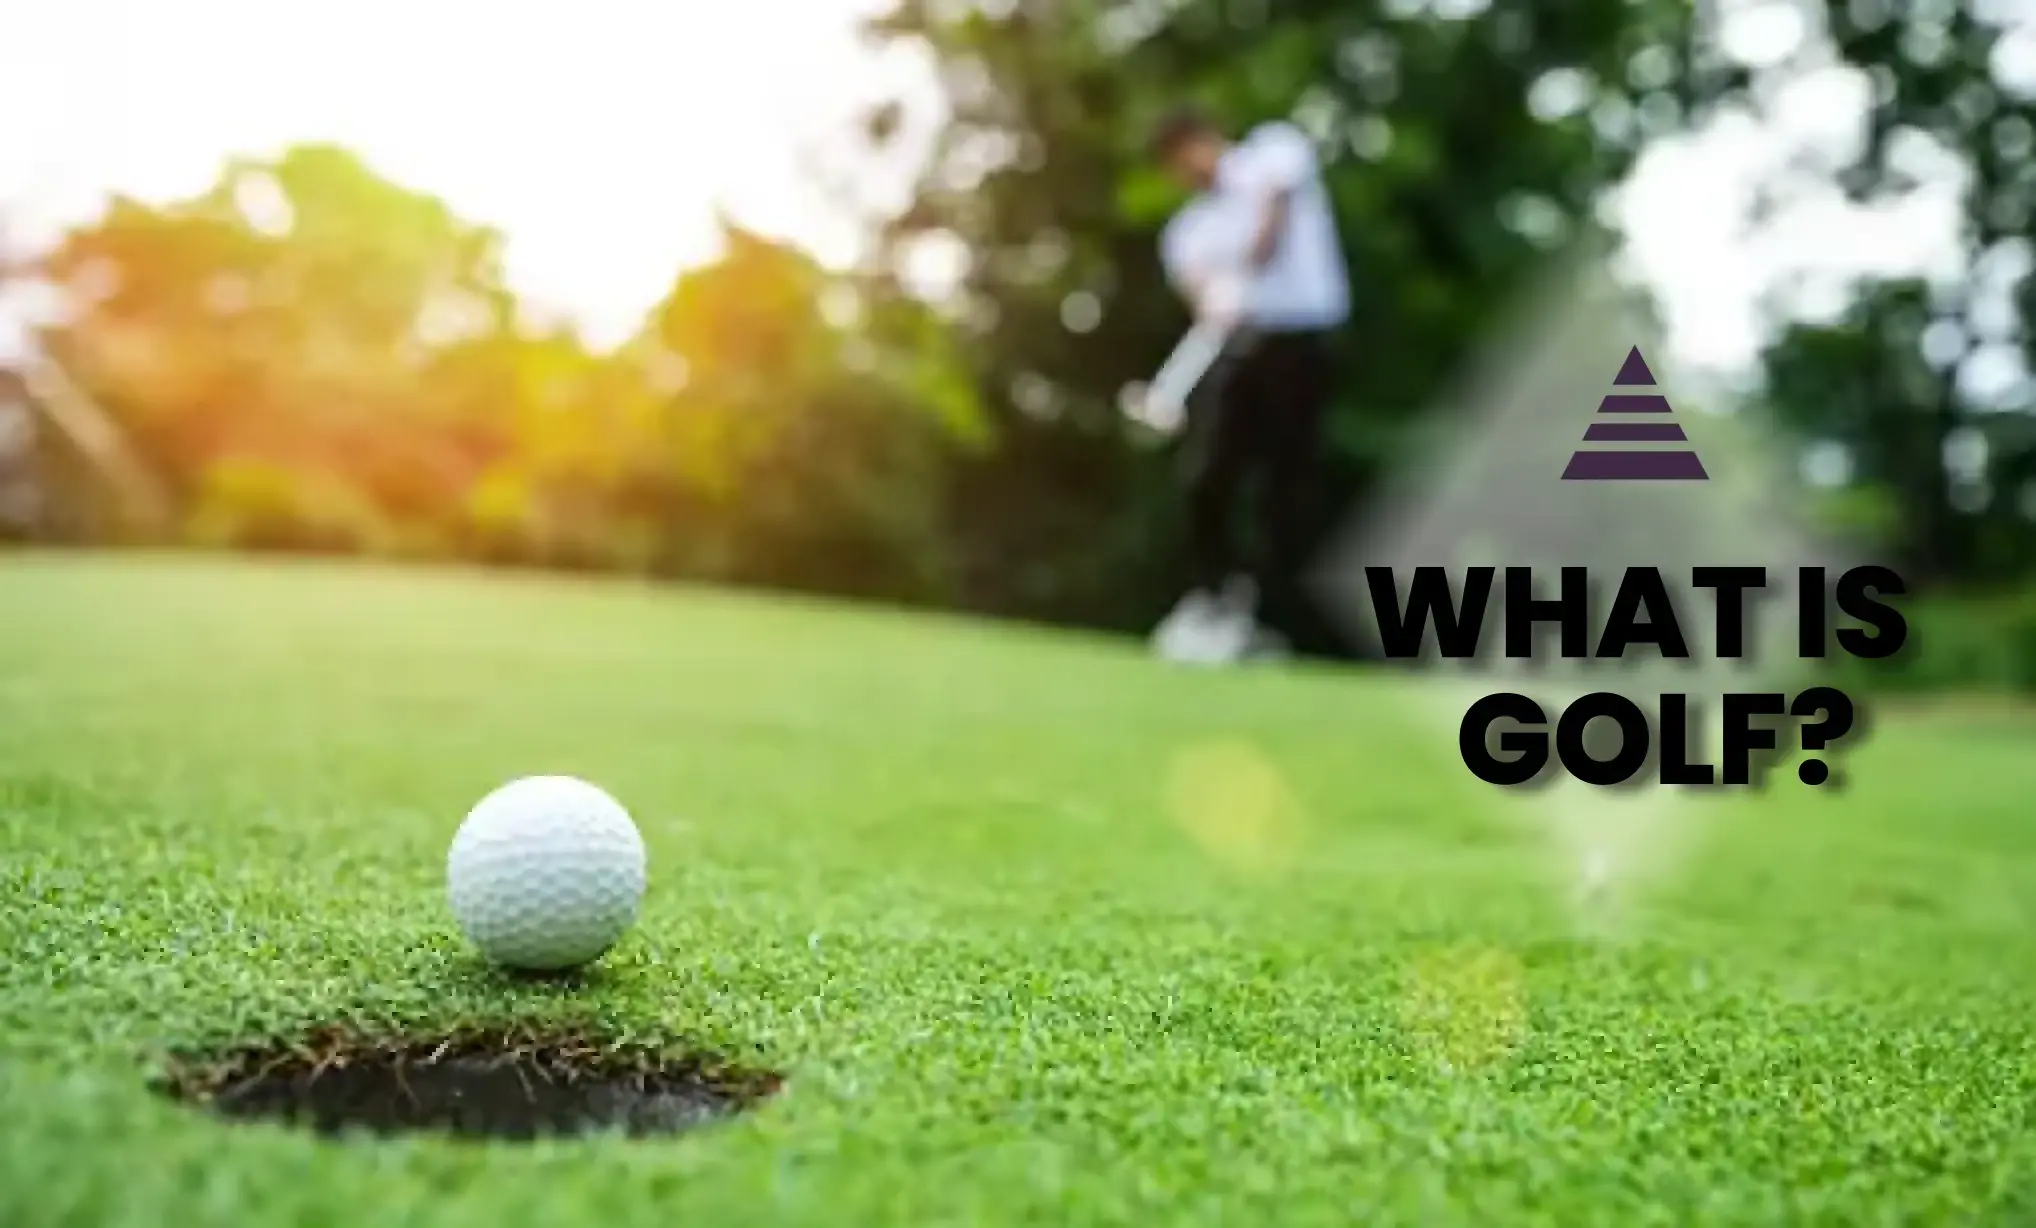 What is golf